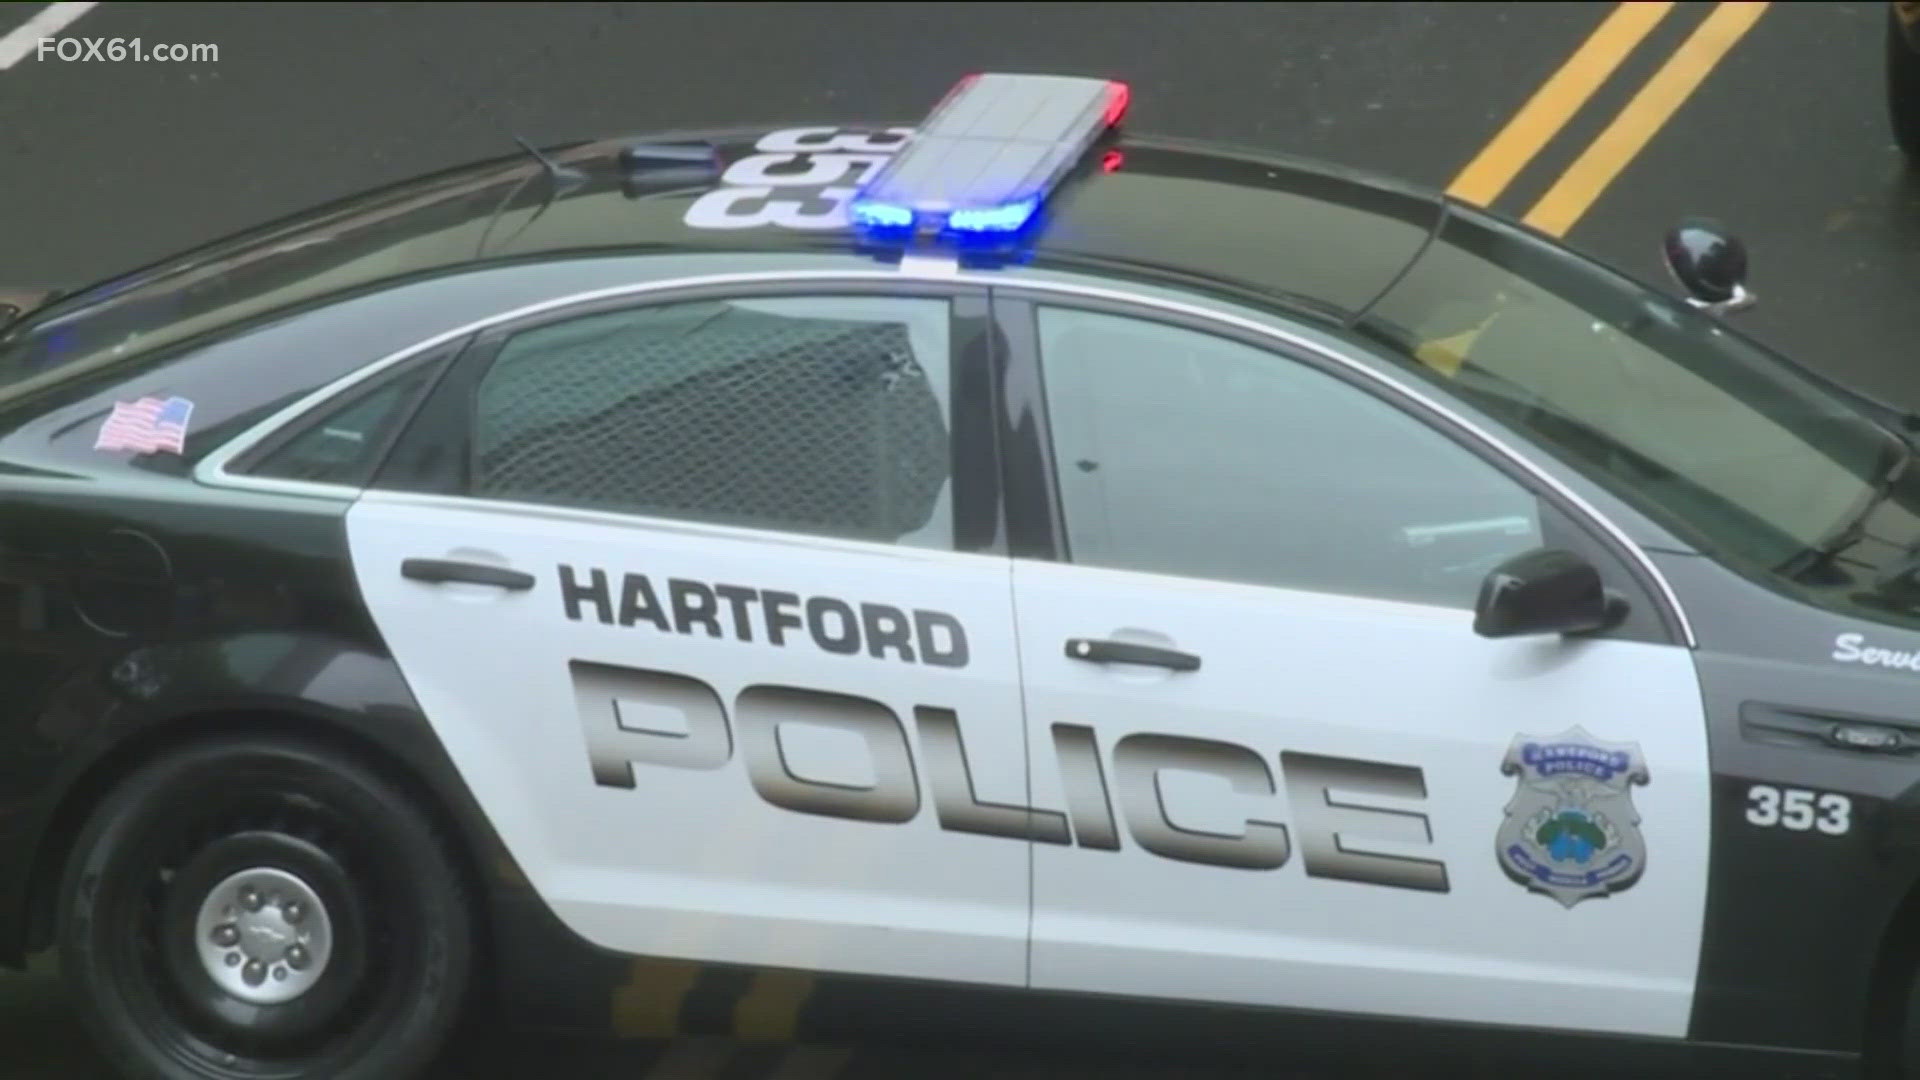 A teenage girl is in serious condition after being shot Thursday night in Hartford.